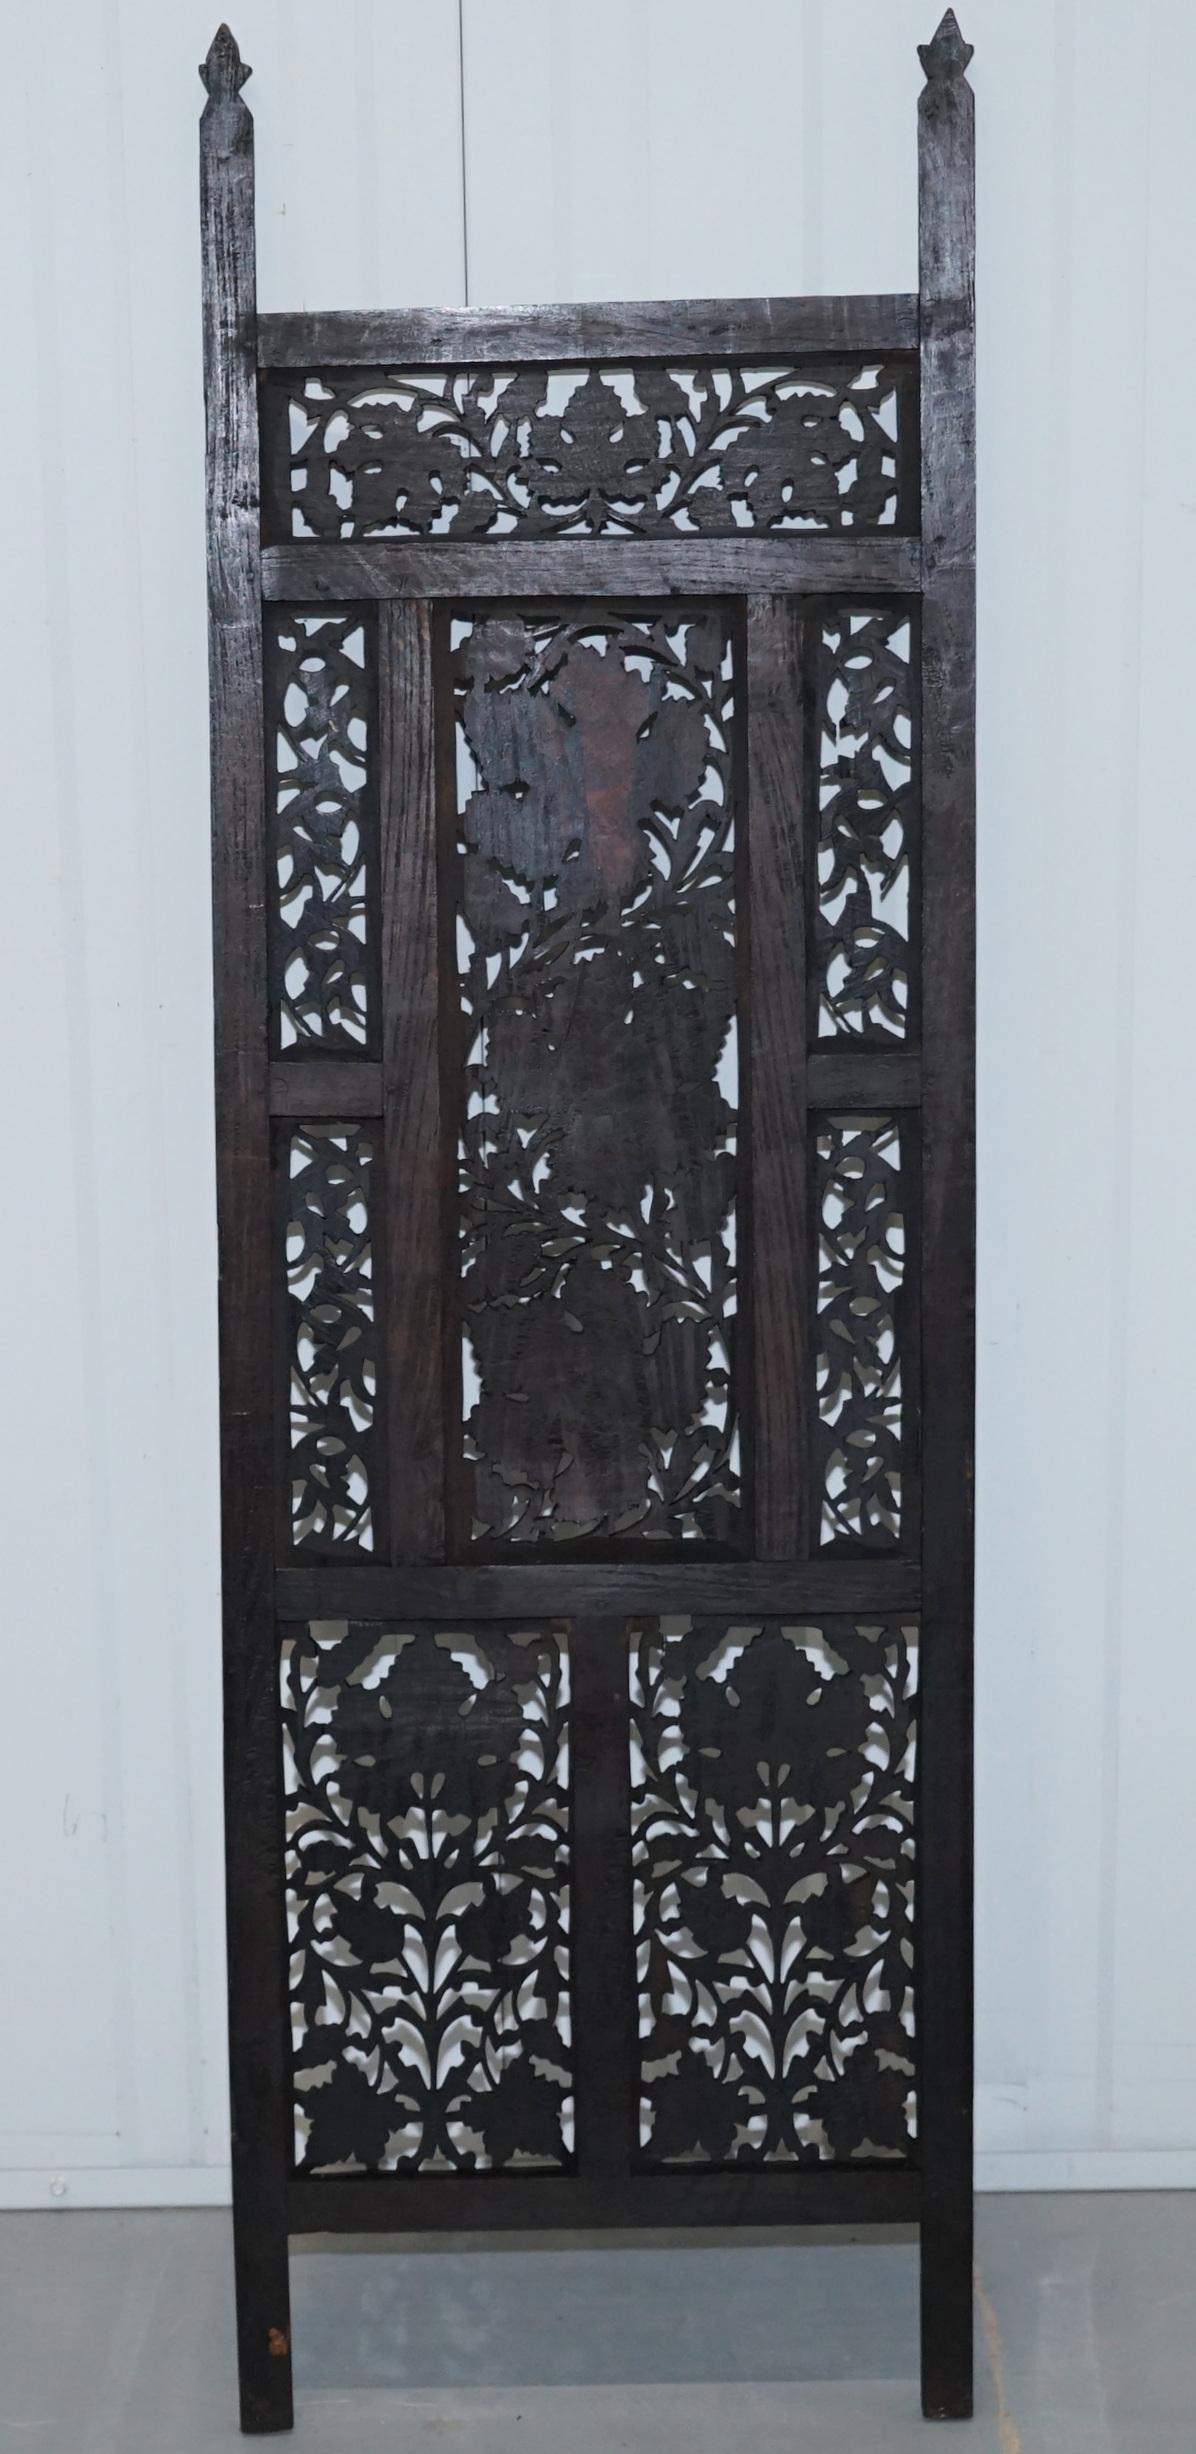 Rare Chinese Fretwork Carved Wall Panels Depicting Leaves Solid Teak Art Wood 8